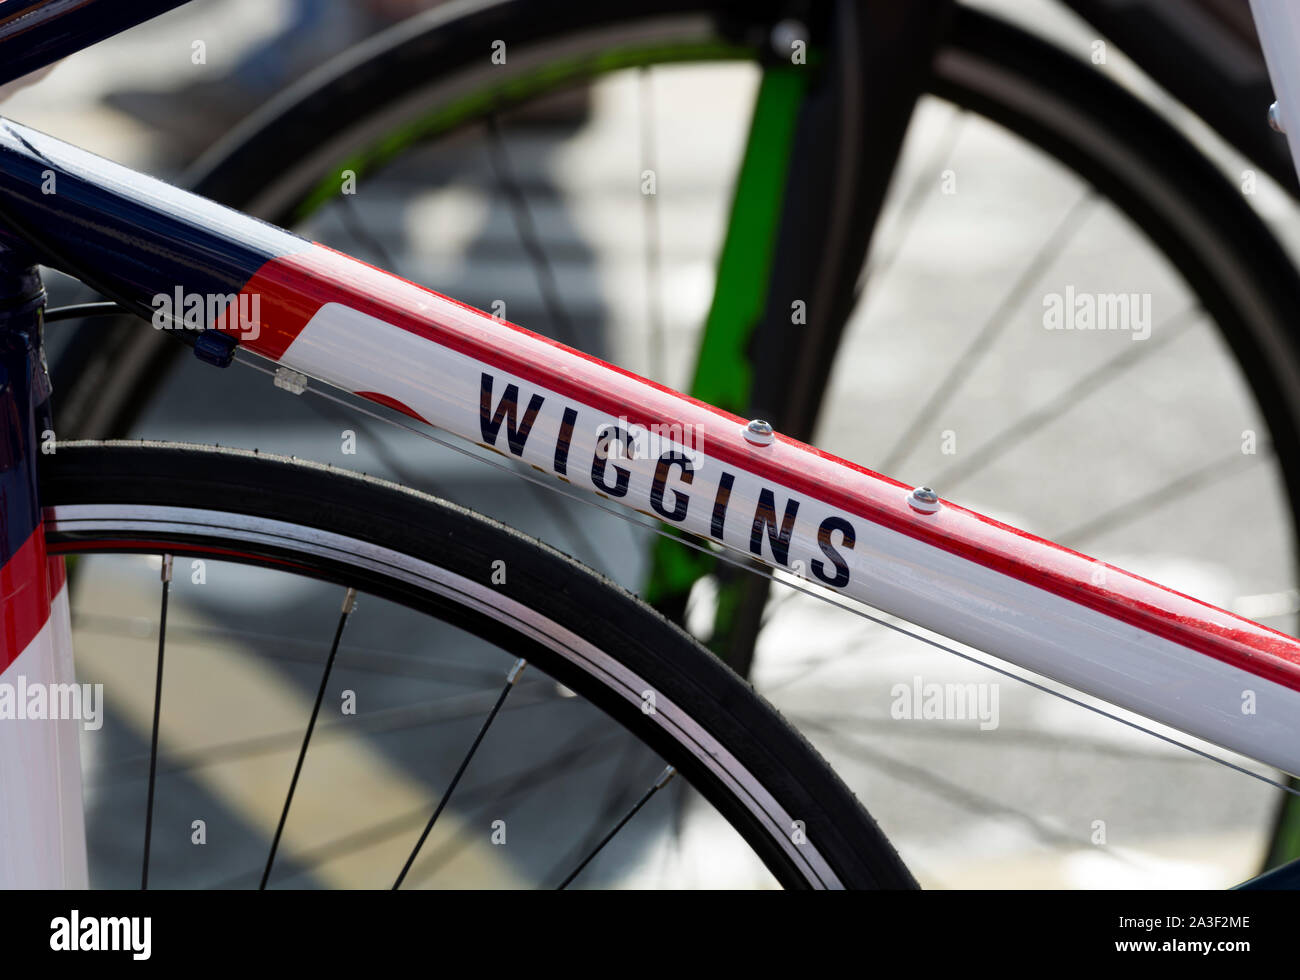 A Wiggins racing bicycle Stock Photo